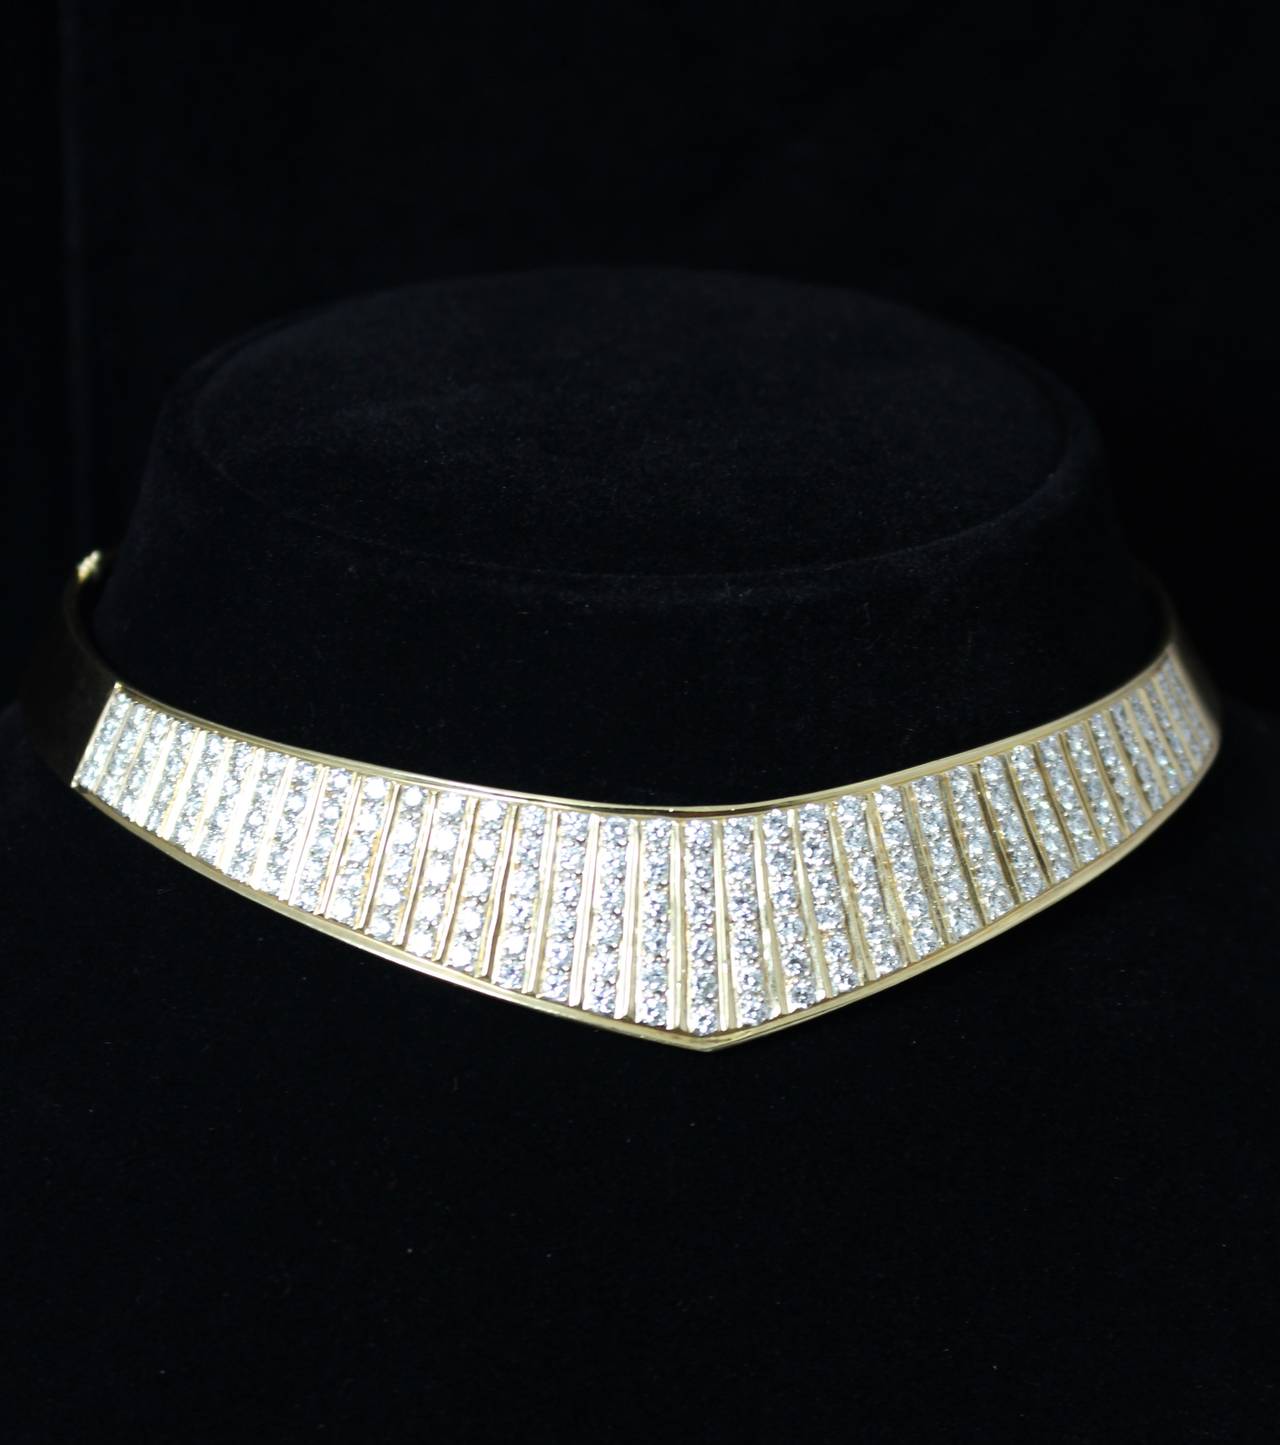 This is an exquisite 14k yellow gold diamond collar with a hinge opening.

It was a gift from Cary Grant to Terry Moore. “Cary Grant gifted me with this beautiful diamond collar for letting him cry on my shoulder while he was going through a